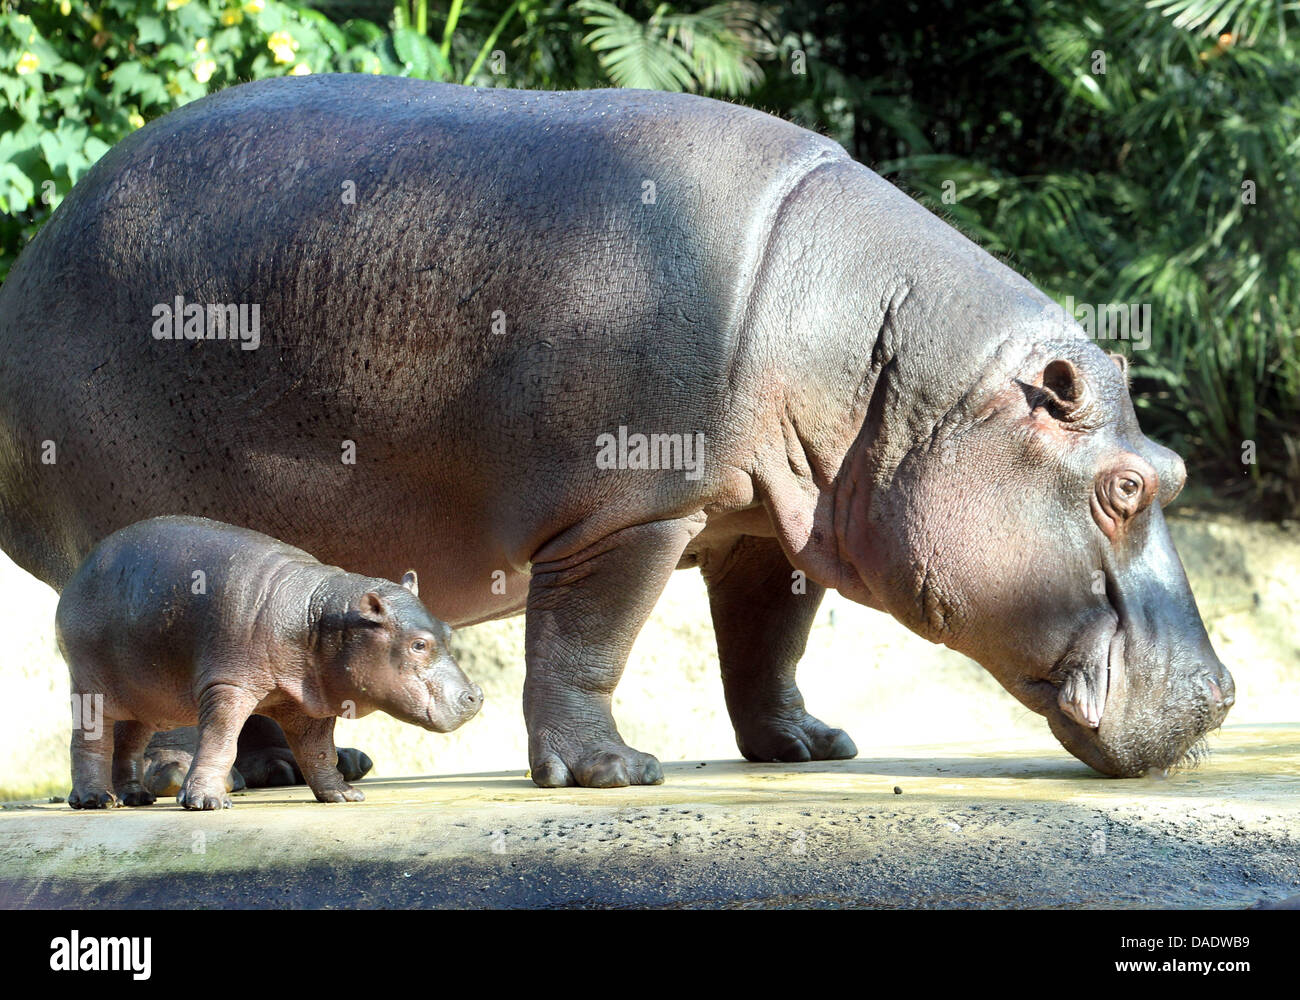 11-year-old hippo Nicole presents her third child born on 23 October 2011 at the zoo in Berlin, Germany, 01 November 2011. The young hippo is a great-grandchild of legendary Berlin hippo 'Bulette'. Photo: Wolfgang Kumm Stock Photo